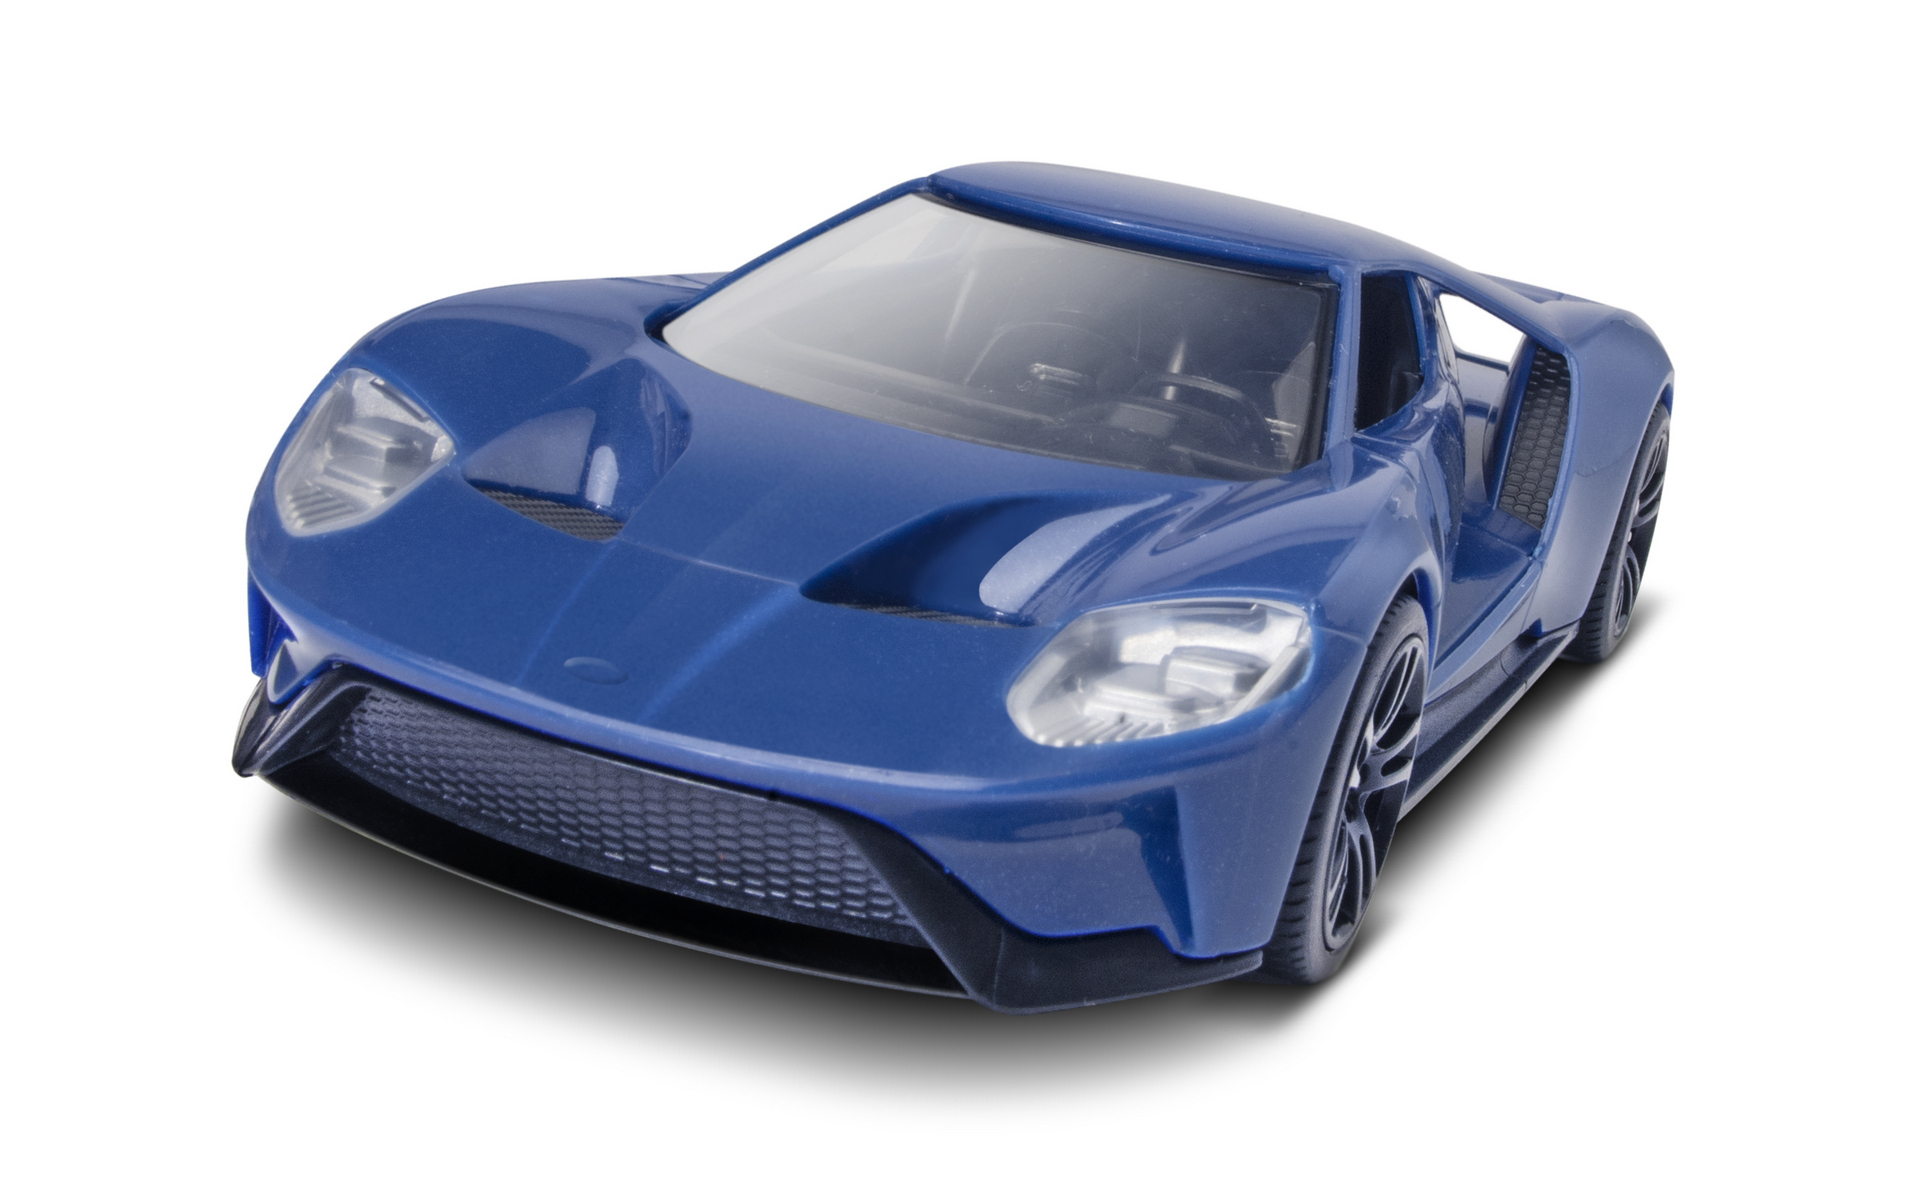 Ford GT Model © Ford Motor Company